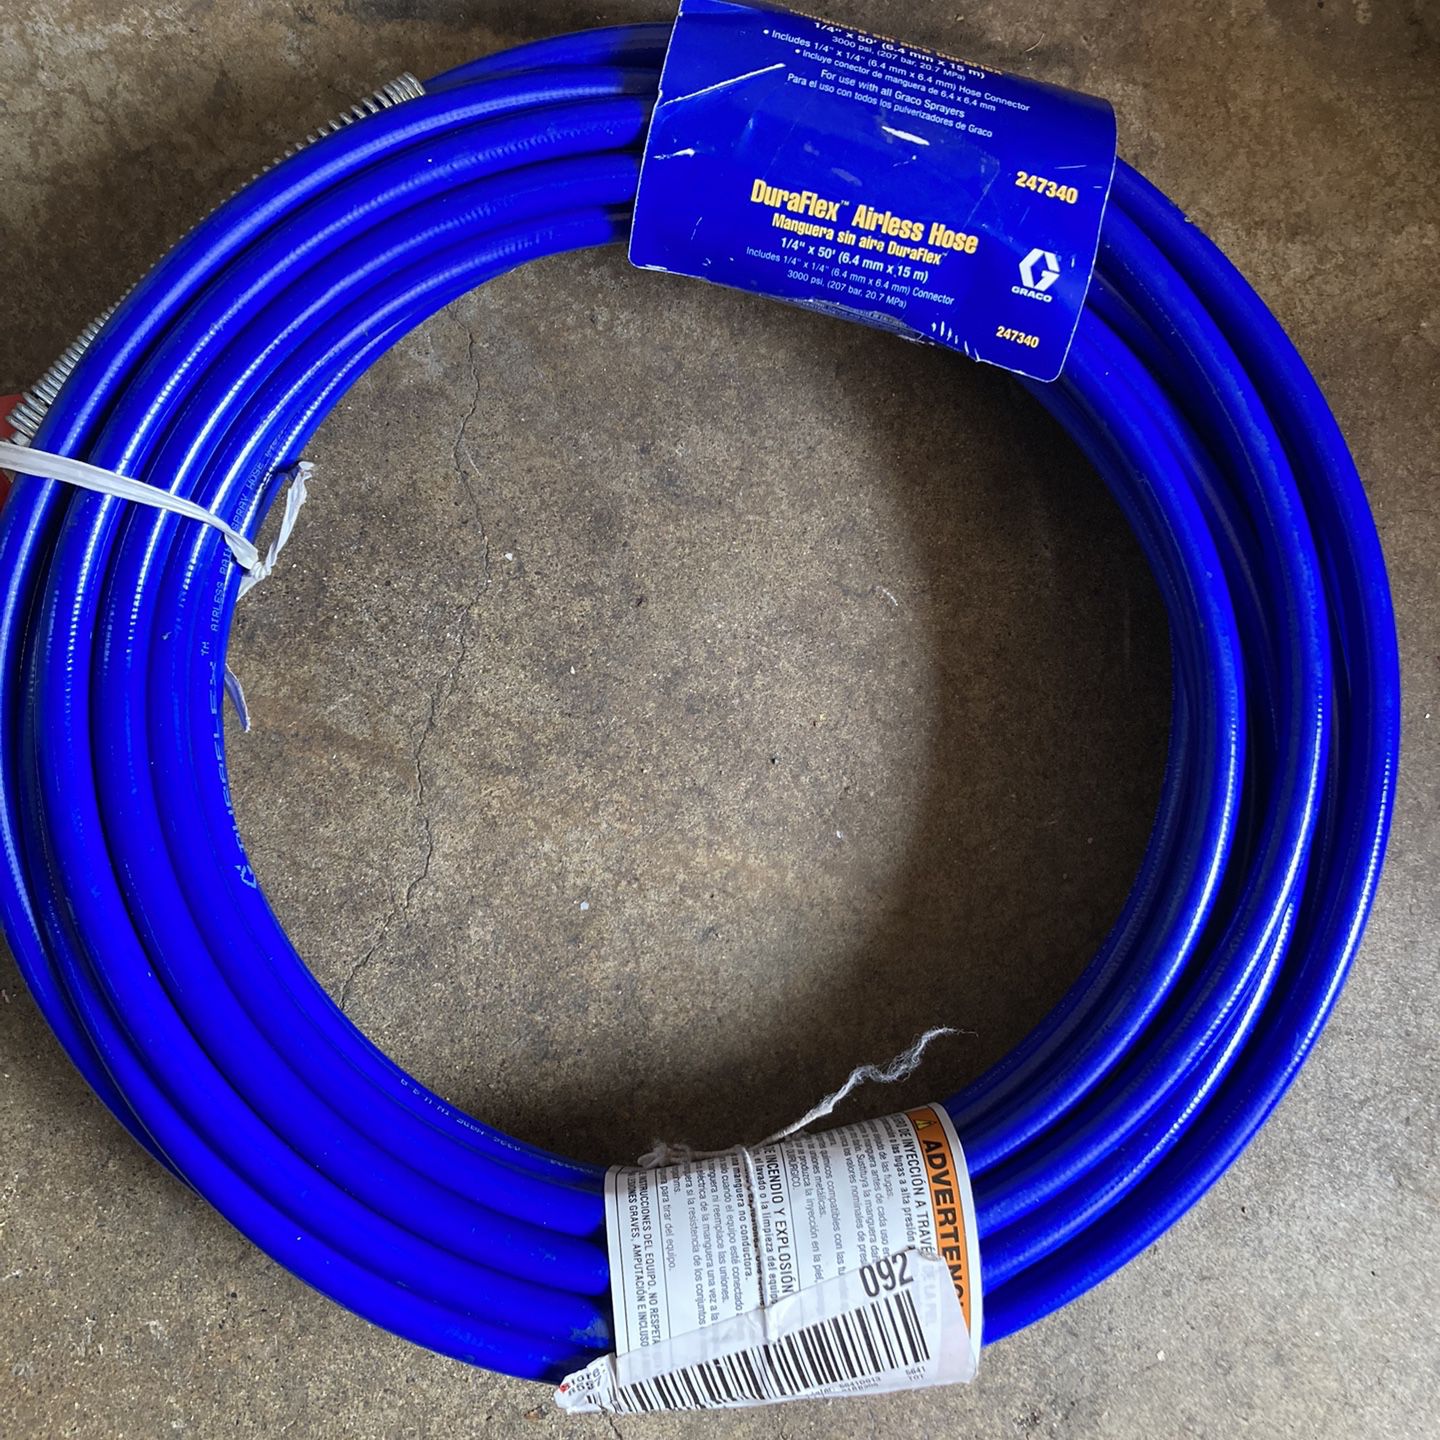 New Graco Air Hose 50 Ft. X1/4 for Sale in Santa Ana, CA OfferUp